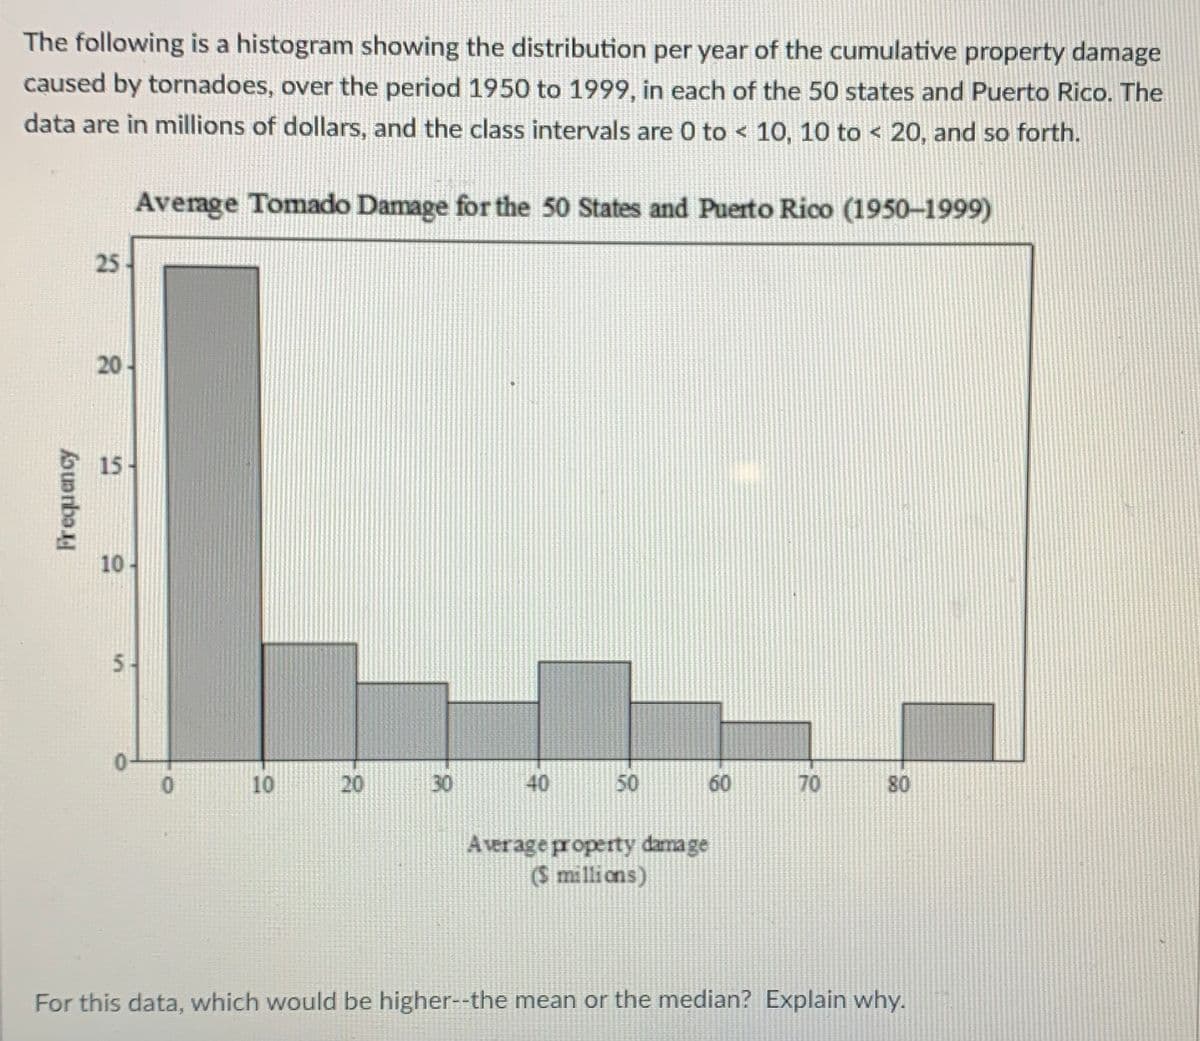 The following is a histogram showing the distribution per year of the cumulative property damage
caused by tornadoes, over the period 1950 to 1999, in each of the 50 states and Puerto Rico. The
data are in millions of dollars, and the class intervals are 0 to < 10, 10 to < 20, and so forth.
Average Tomado Damage for the 50 States and Puerto Rico (1950-1999)
25
20
15
10-
5-
10
20
30
40
50
60
70
80
Average property dama ge
S millions)
For this data, which would be higher--the mean or the median? Explain why.
Frequency
